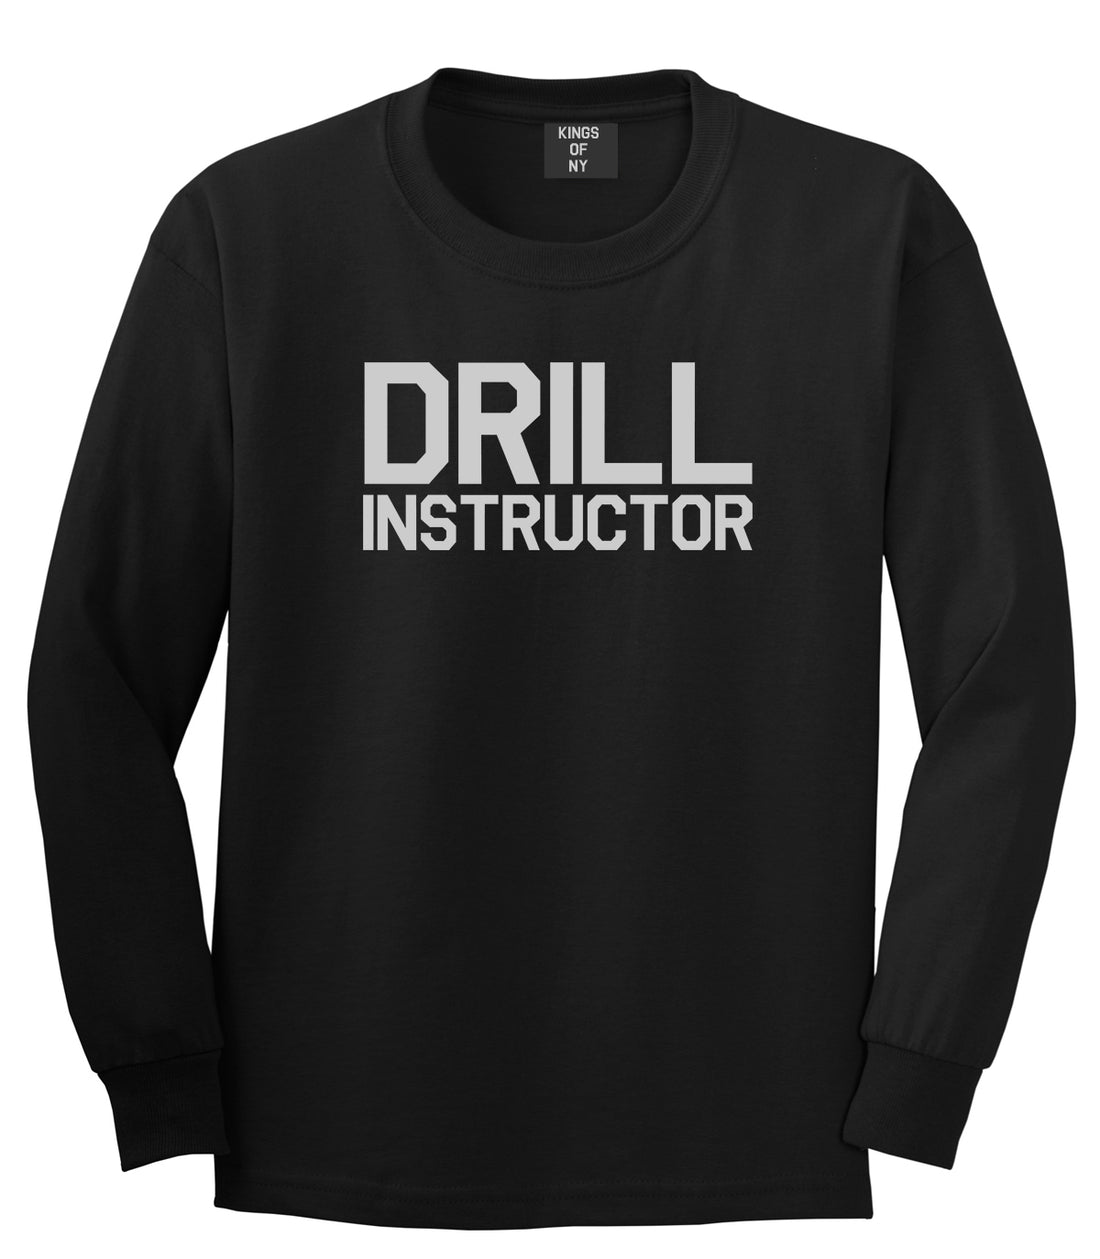 Drill Instructor Mens Black Long Sleeve T-Shirt by Kings Of NY